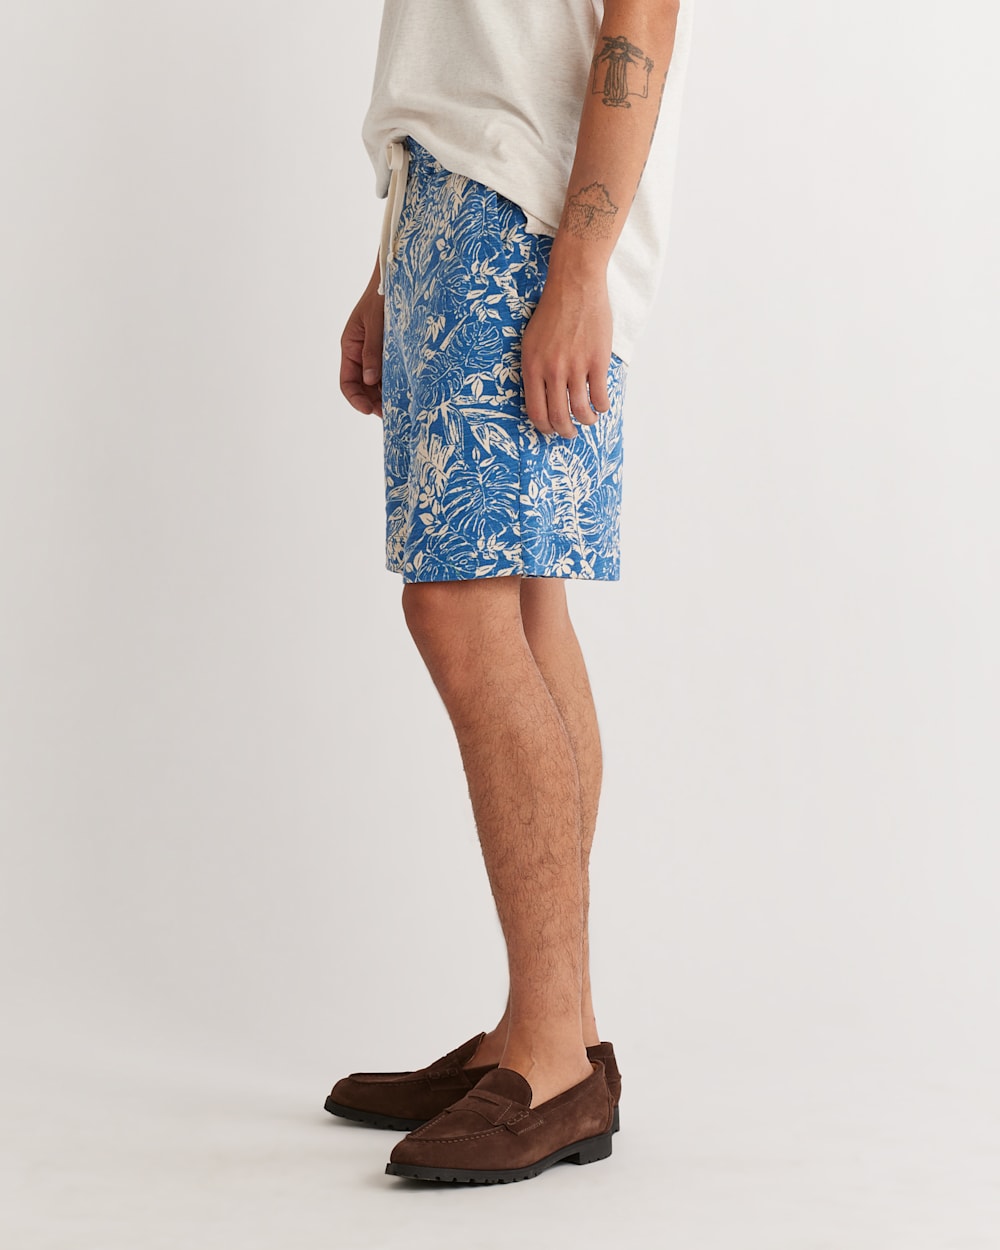 ALTERNATE VIEW OF MEN'S WAYSIDE KNIT SHORTS IN SEASHORE BLUE image number 3